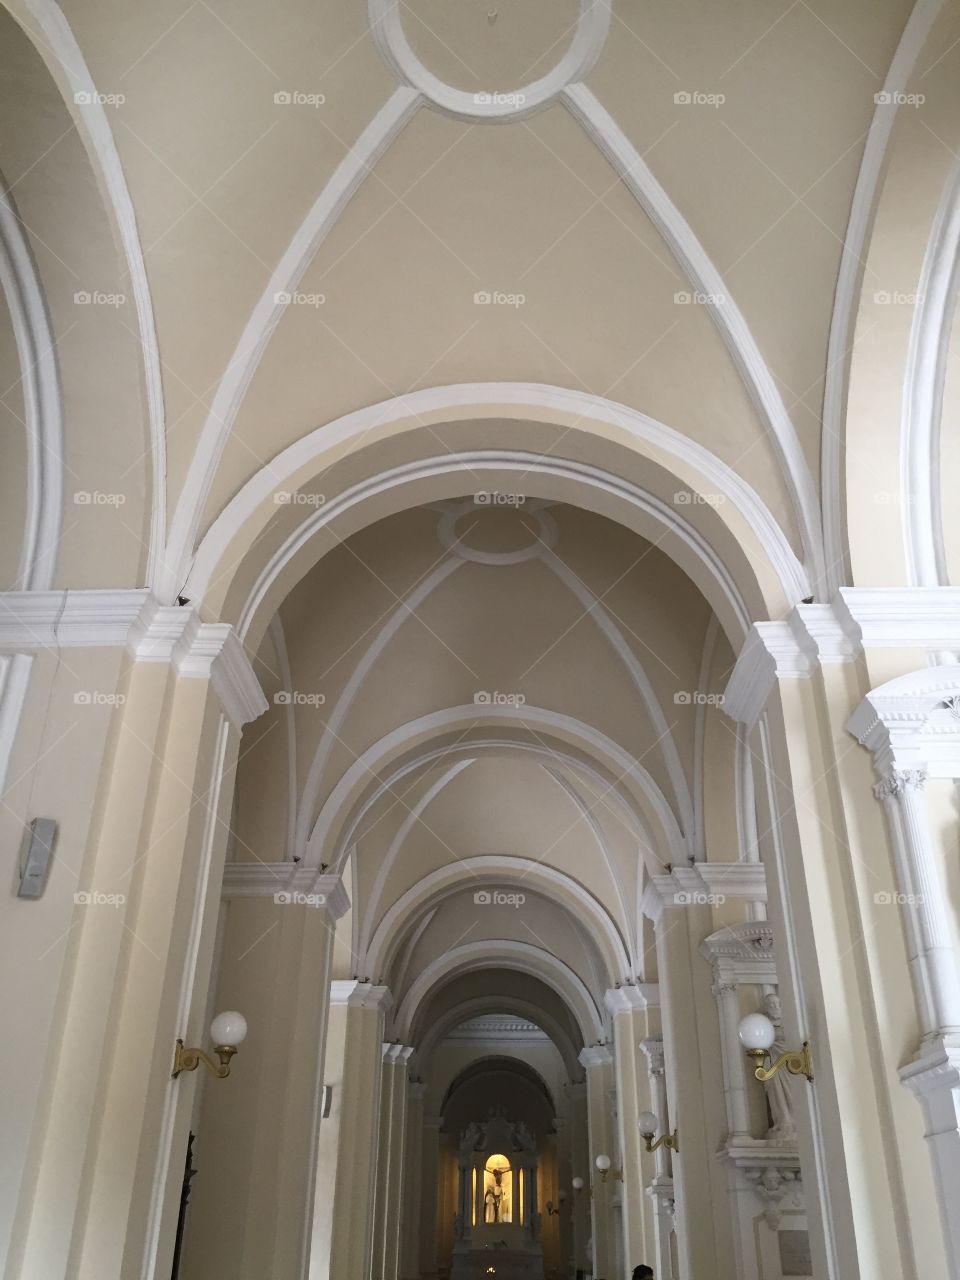 Architecture, No Person, Church, Indoors, Ceiling